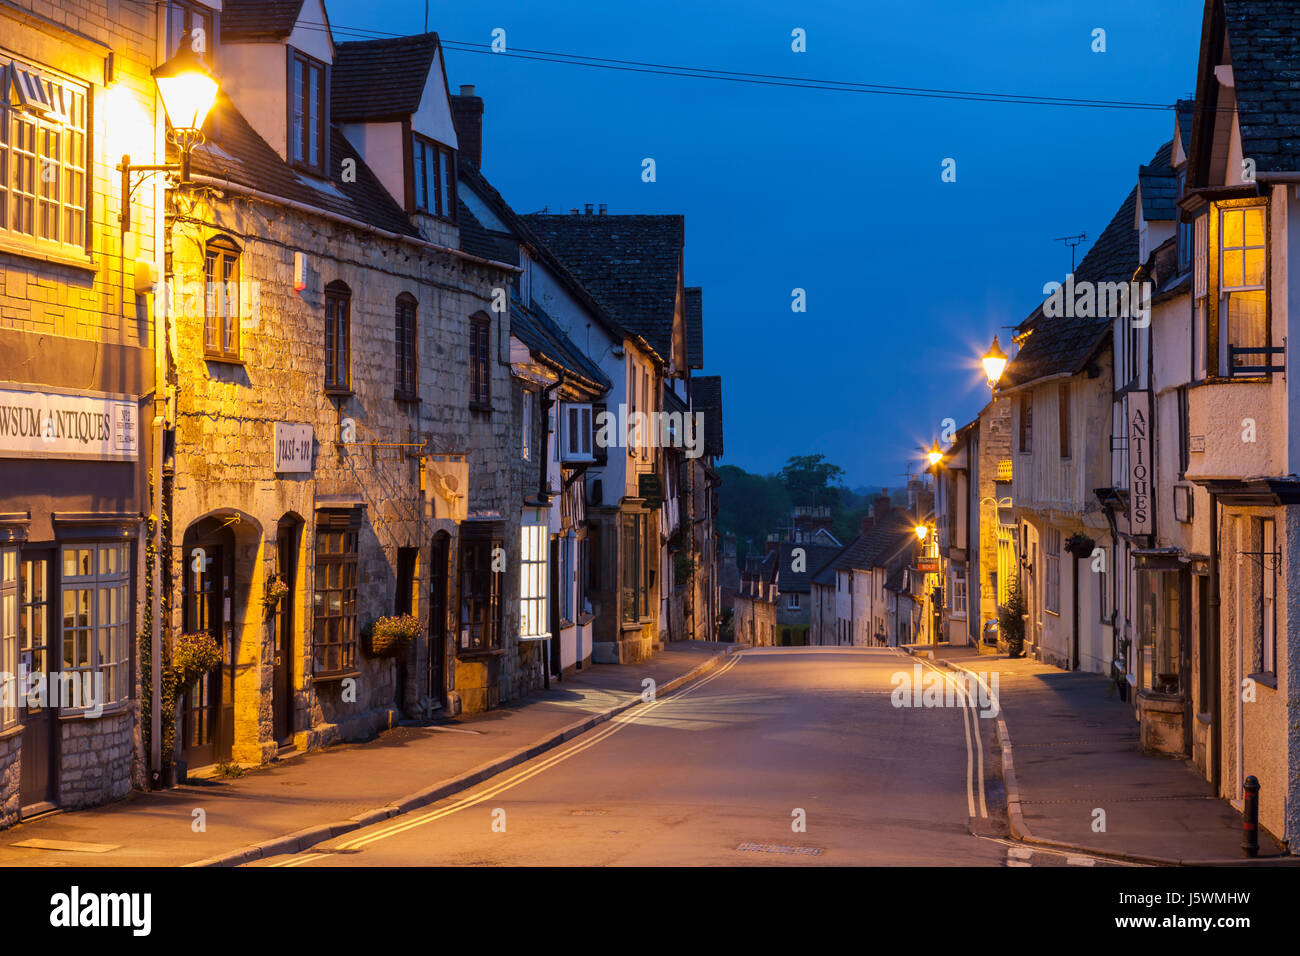 Dawn in the Cotswold town of Winchcombe, Gloucestershire, England. Stock Photo